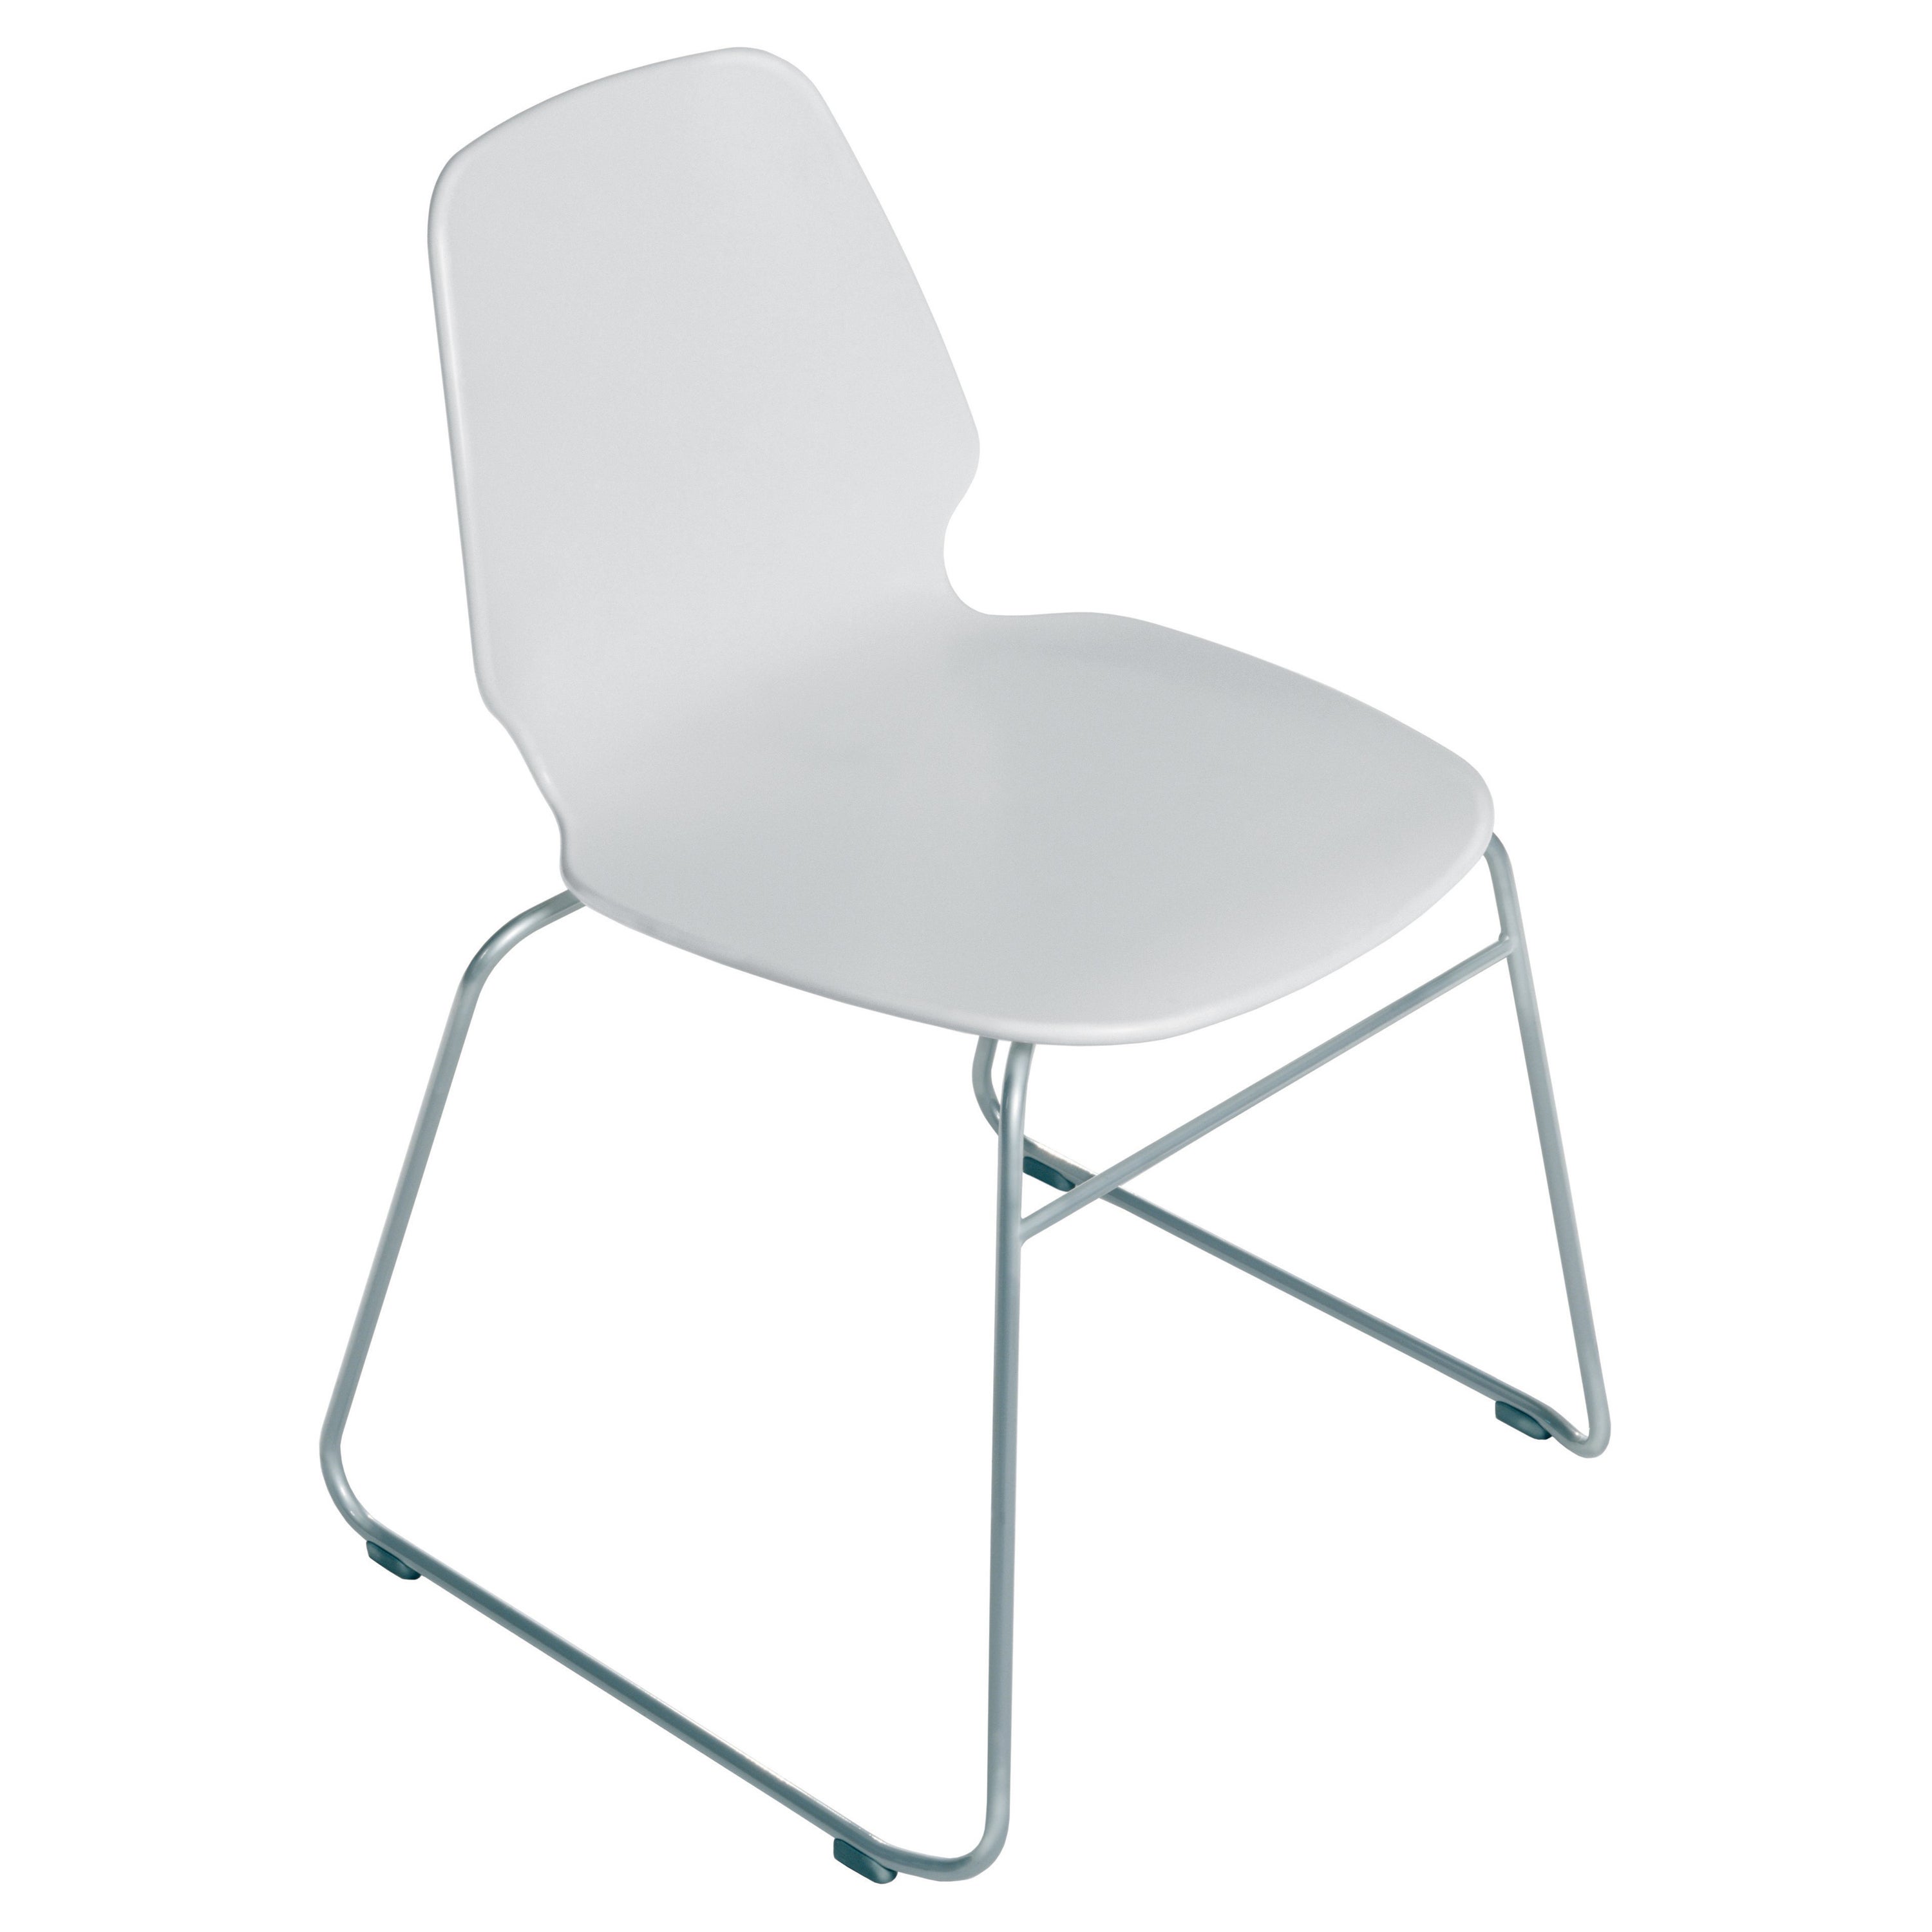 Alias 531 Selinunte Sledge Chair in White and Steel Frame by Alfredo Häberli For Sale